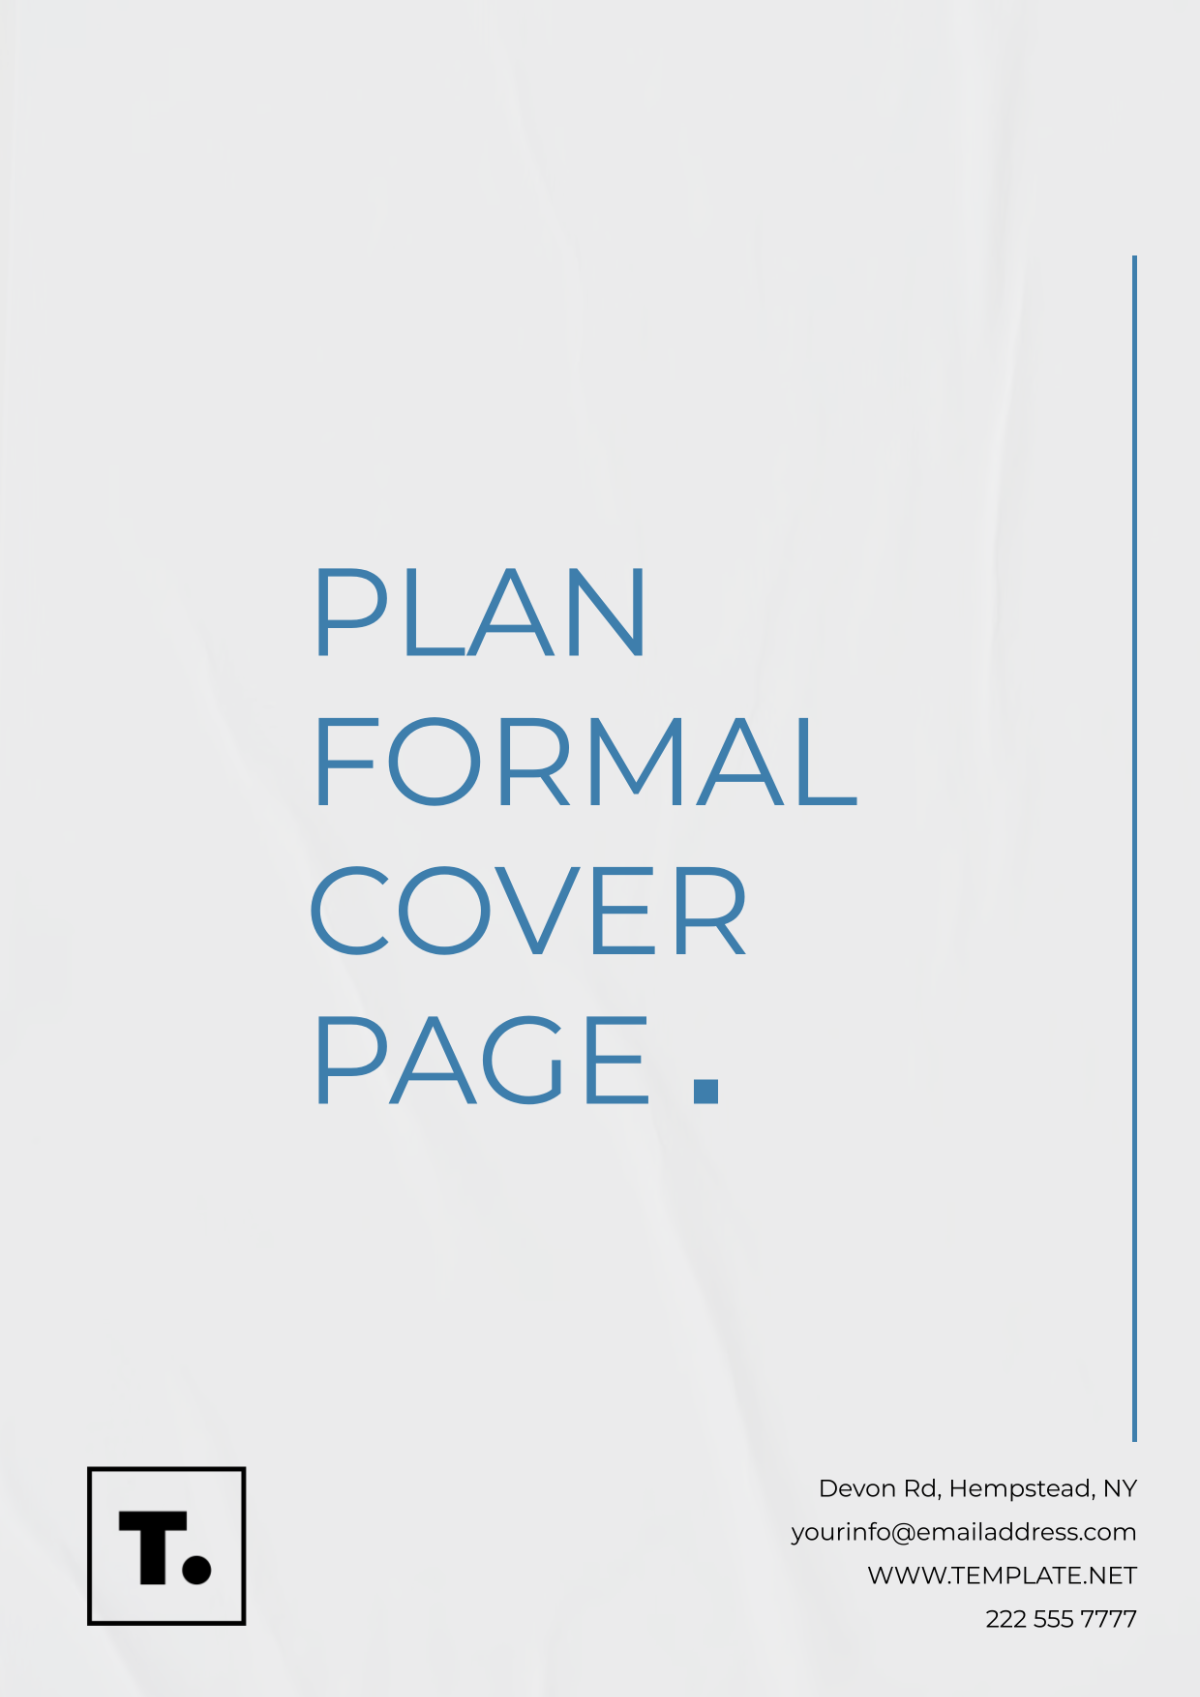 Plan Formal Cover Page